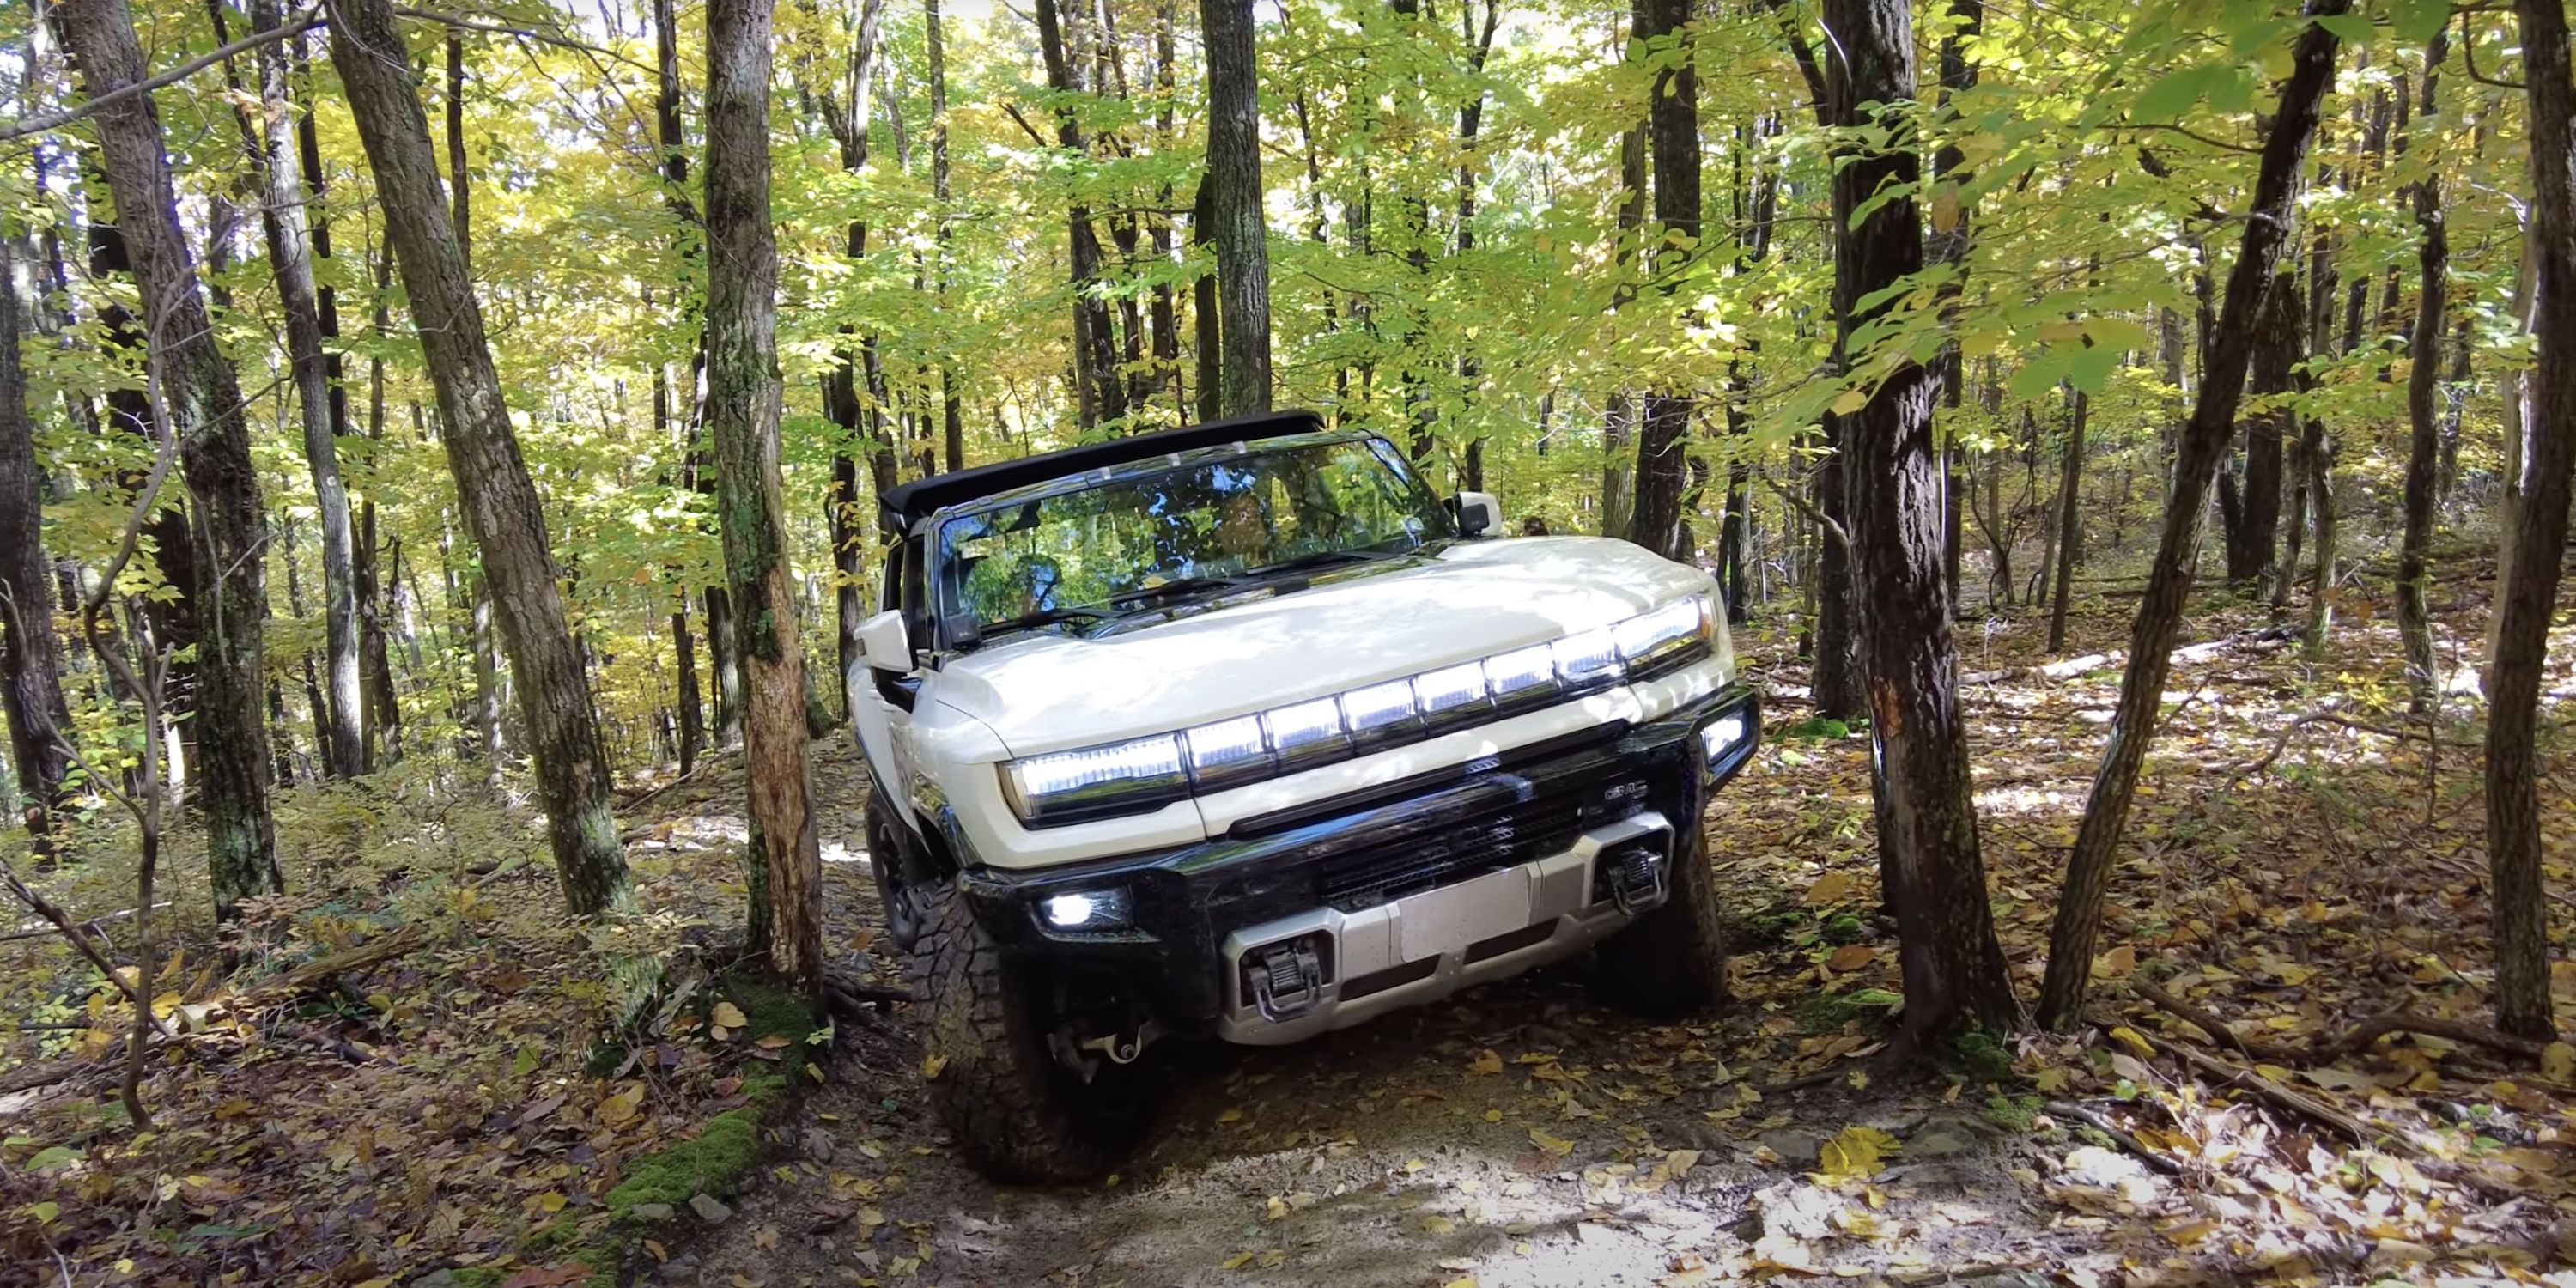 Here's How the Hummer EV Performs on Real-World Off-Road Trails